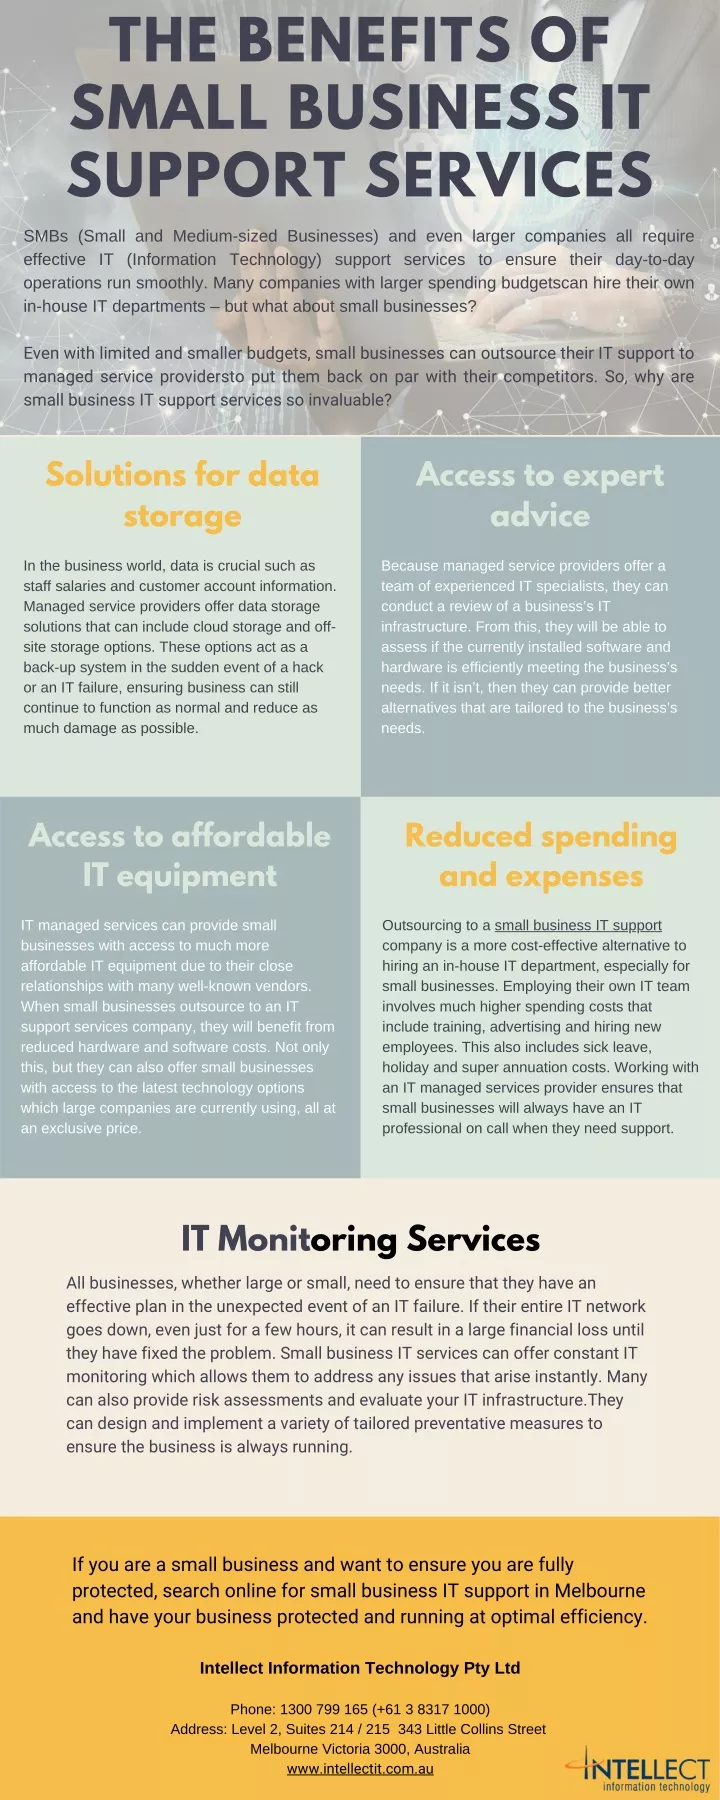 the benefits of small business it support services